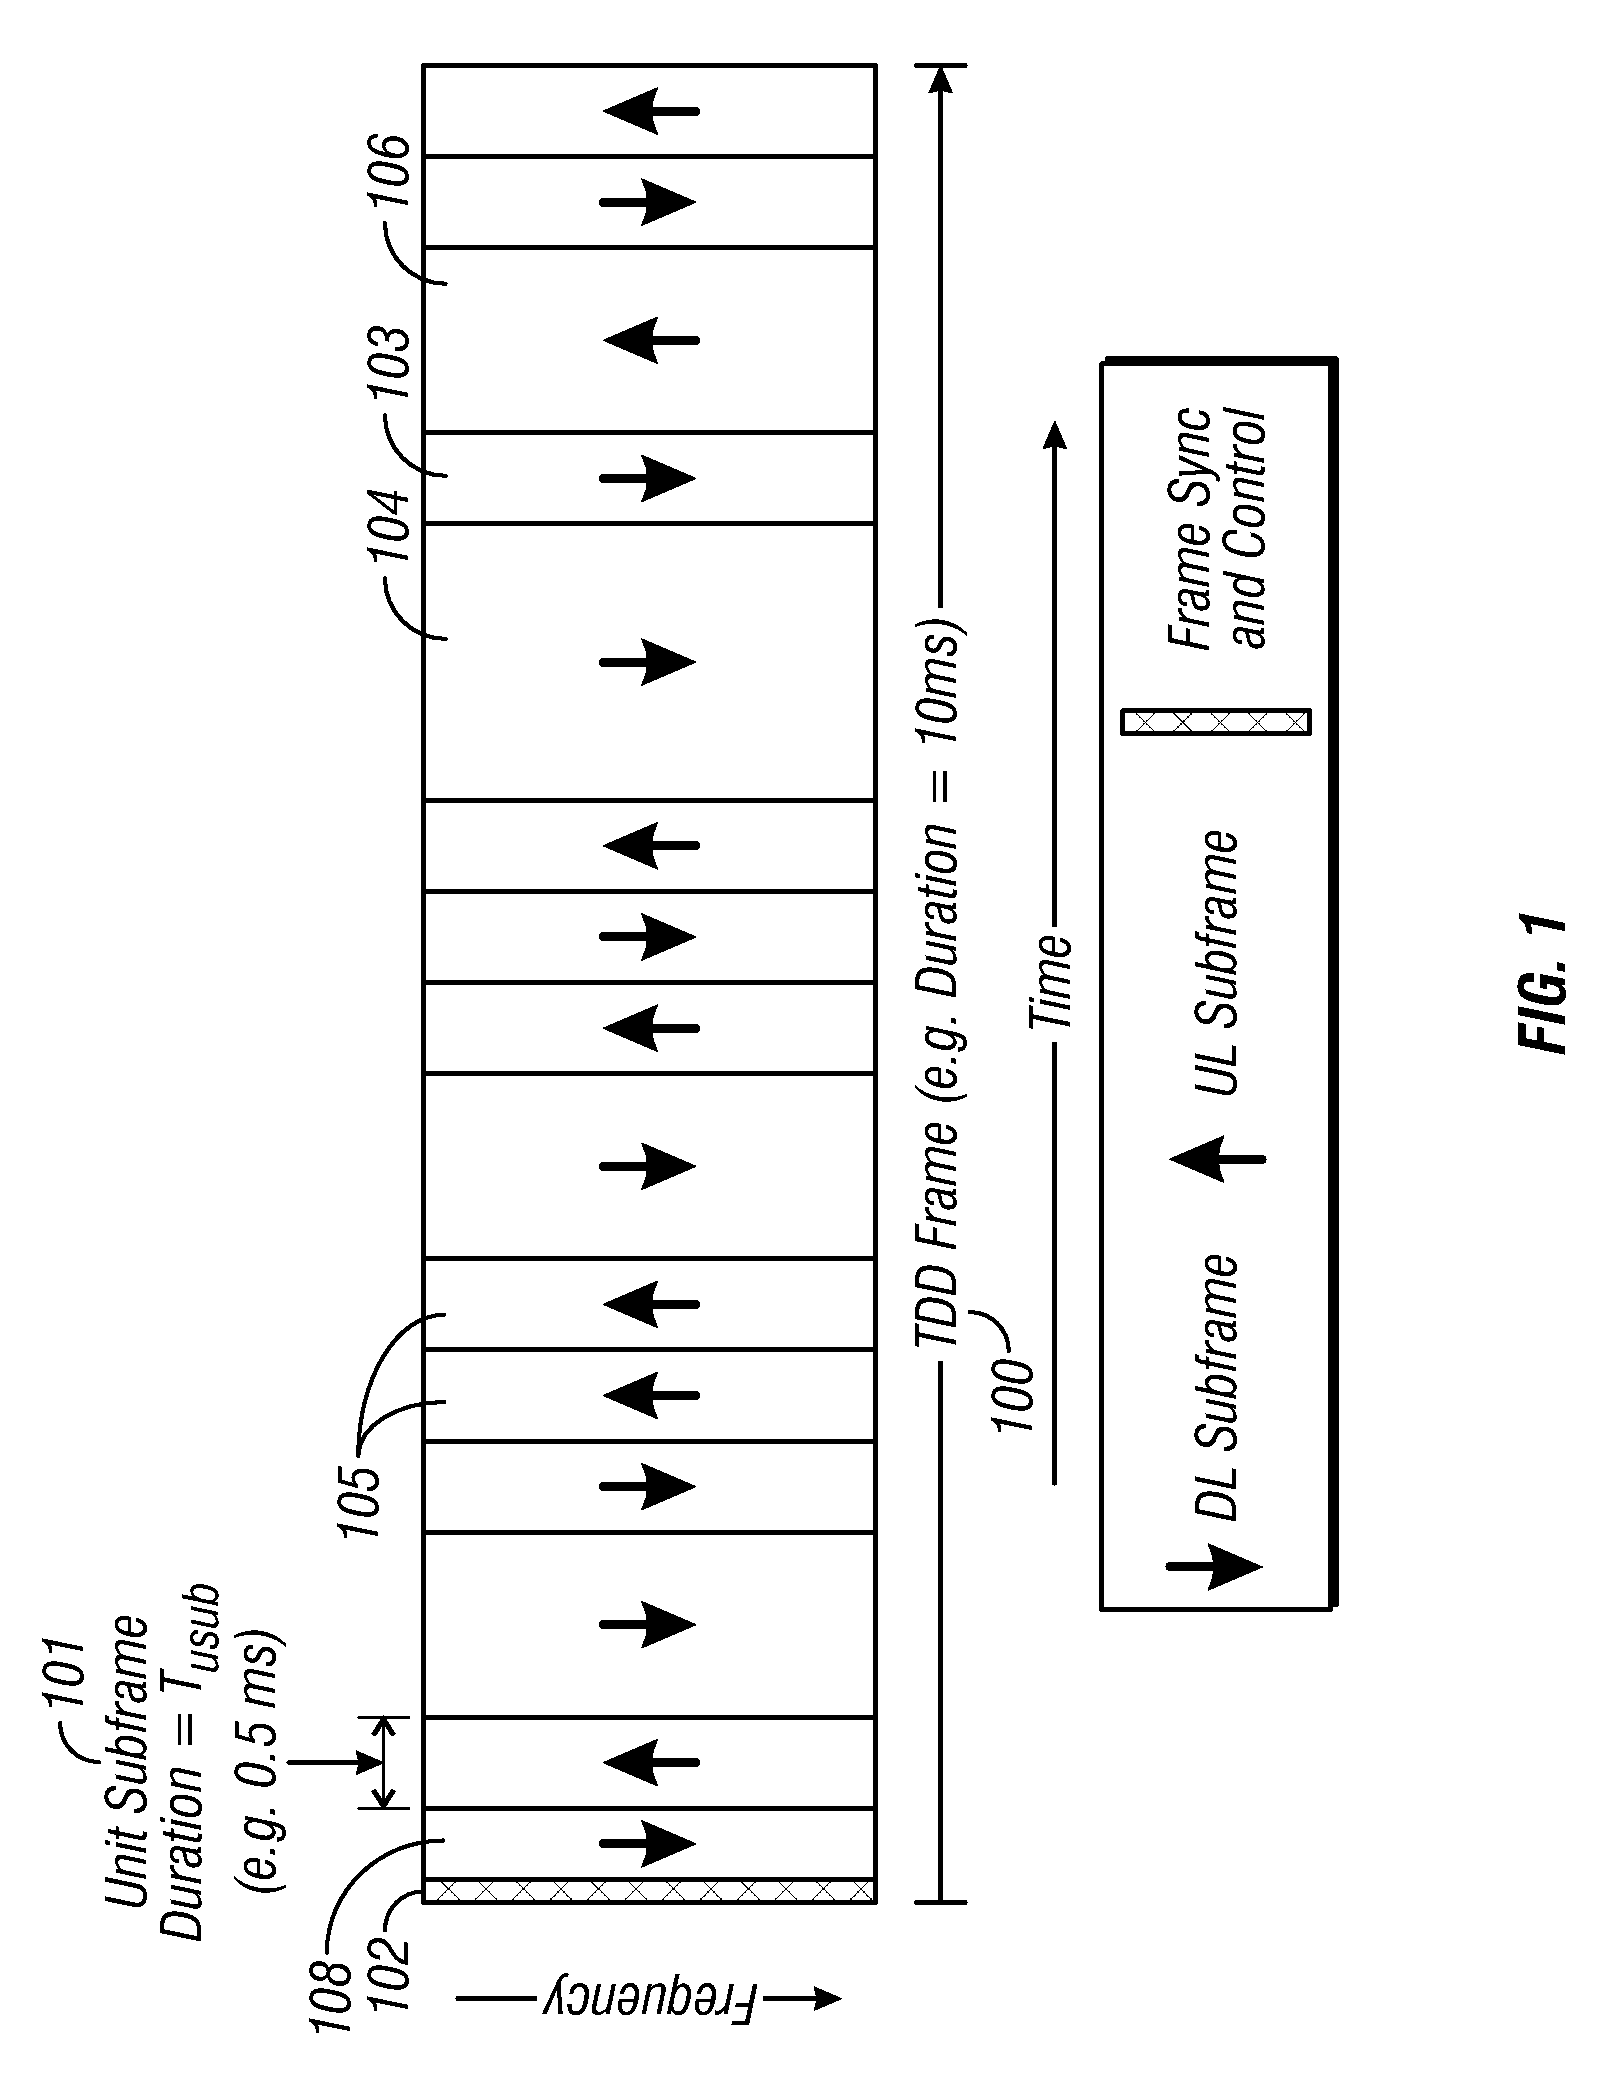 Flexible ofdm/ofdma frame structure for communication systems